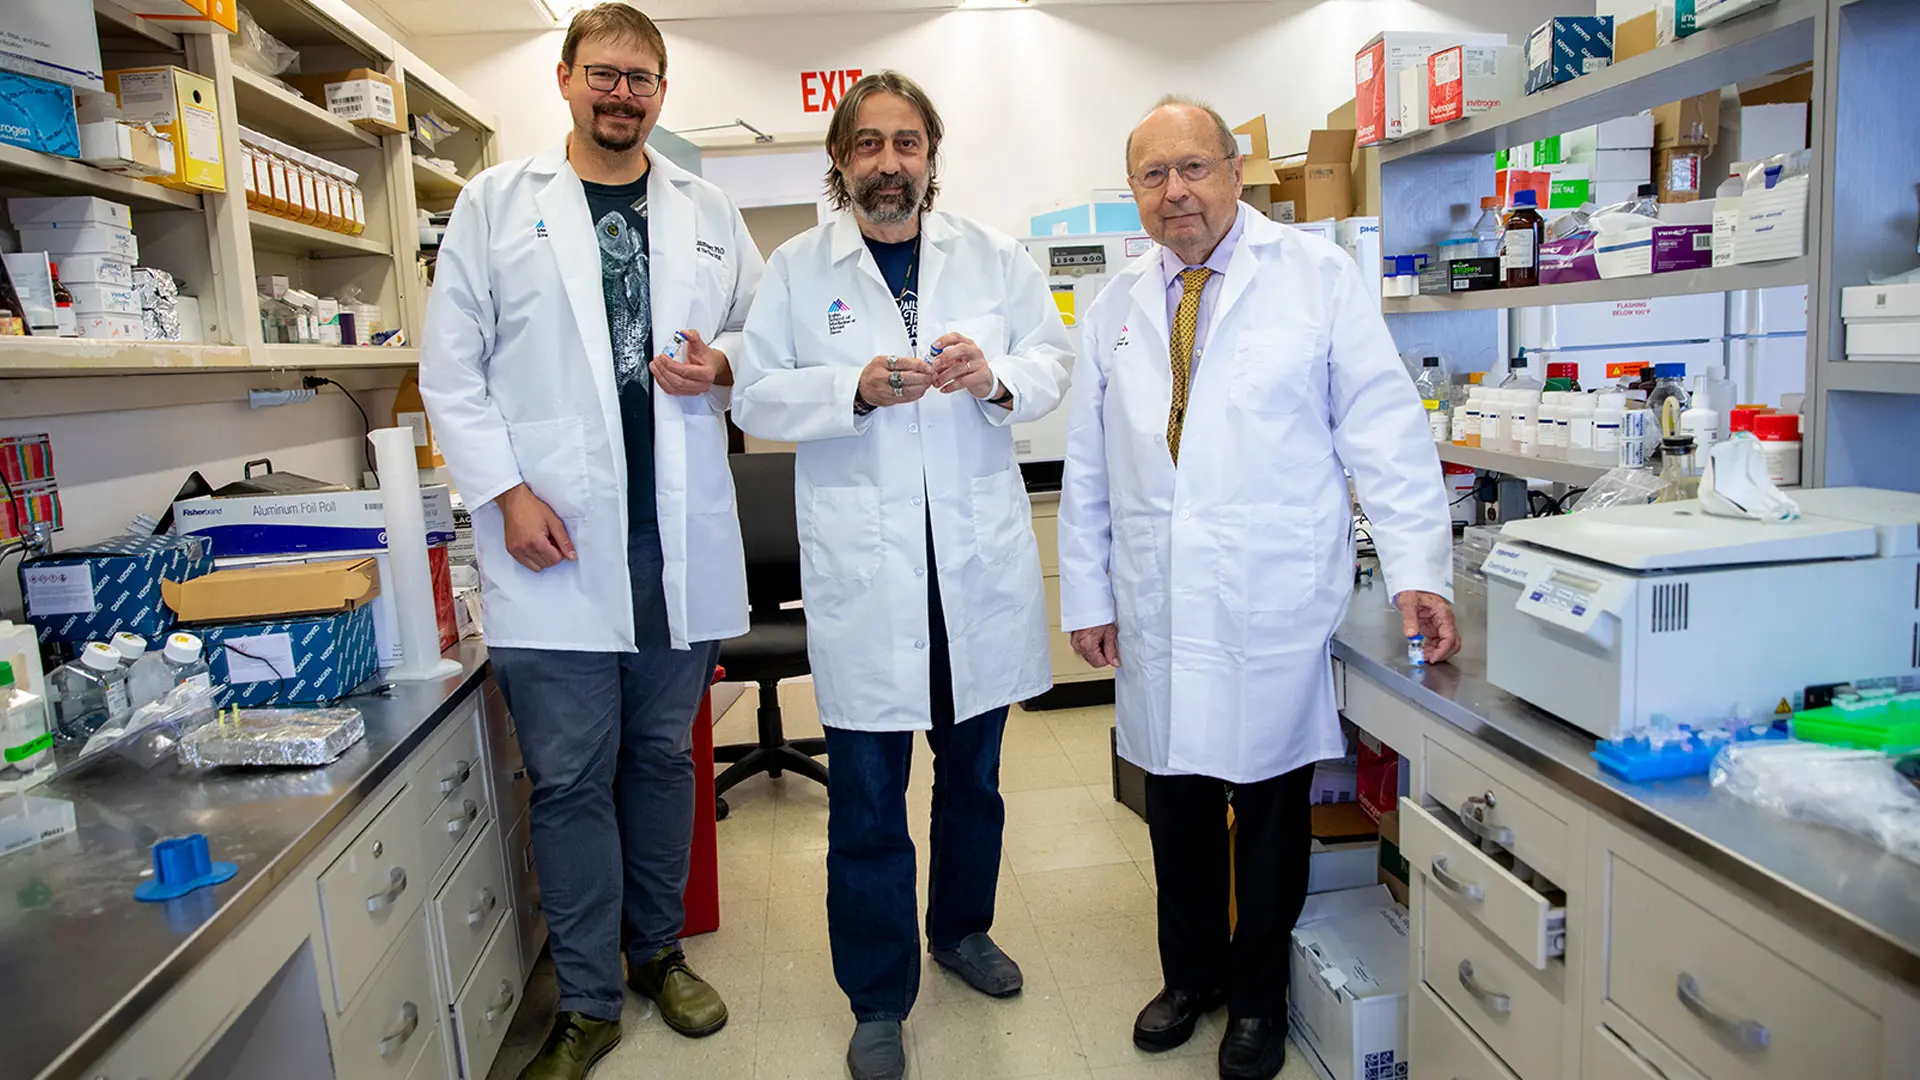 Mount Sinai's leading vaccine developers, from left, Florian Krammer, PhD; Adolfo Garcia-Sastre, PhD; and Peter Palese, PhD. 